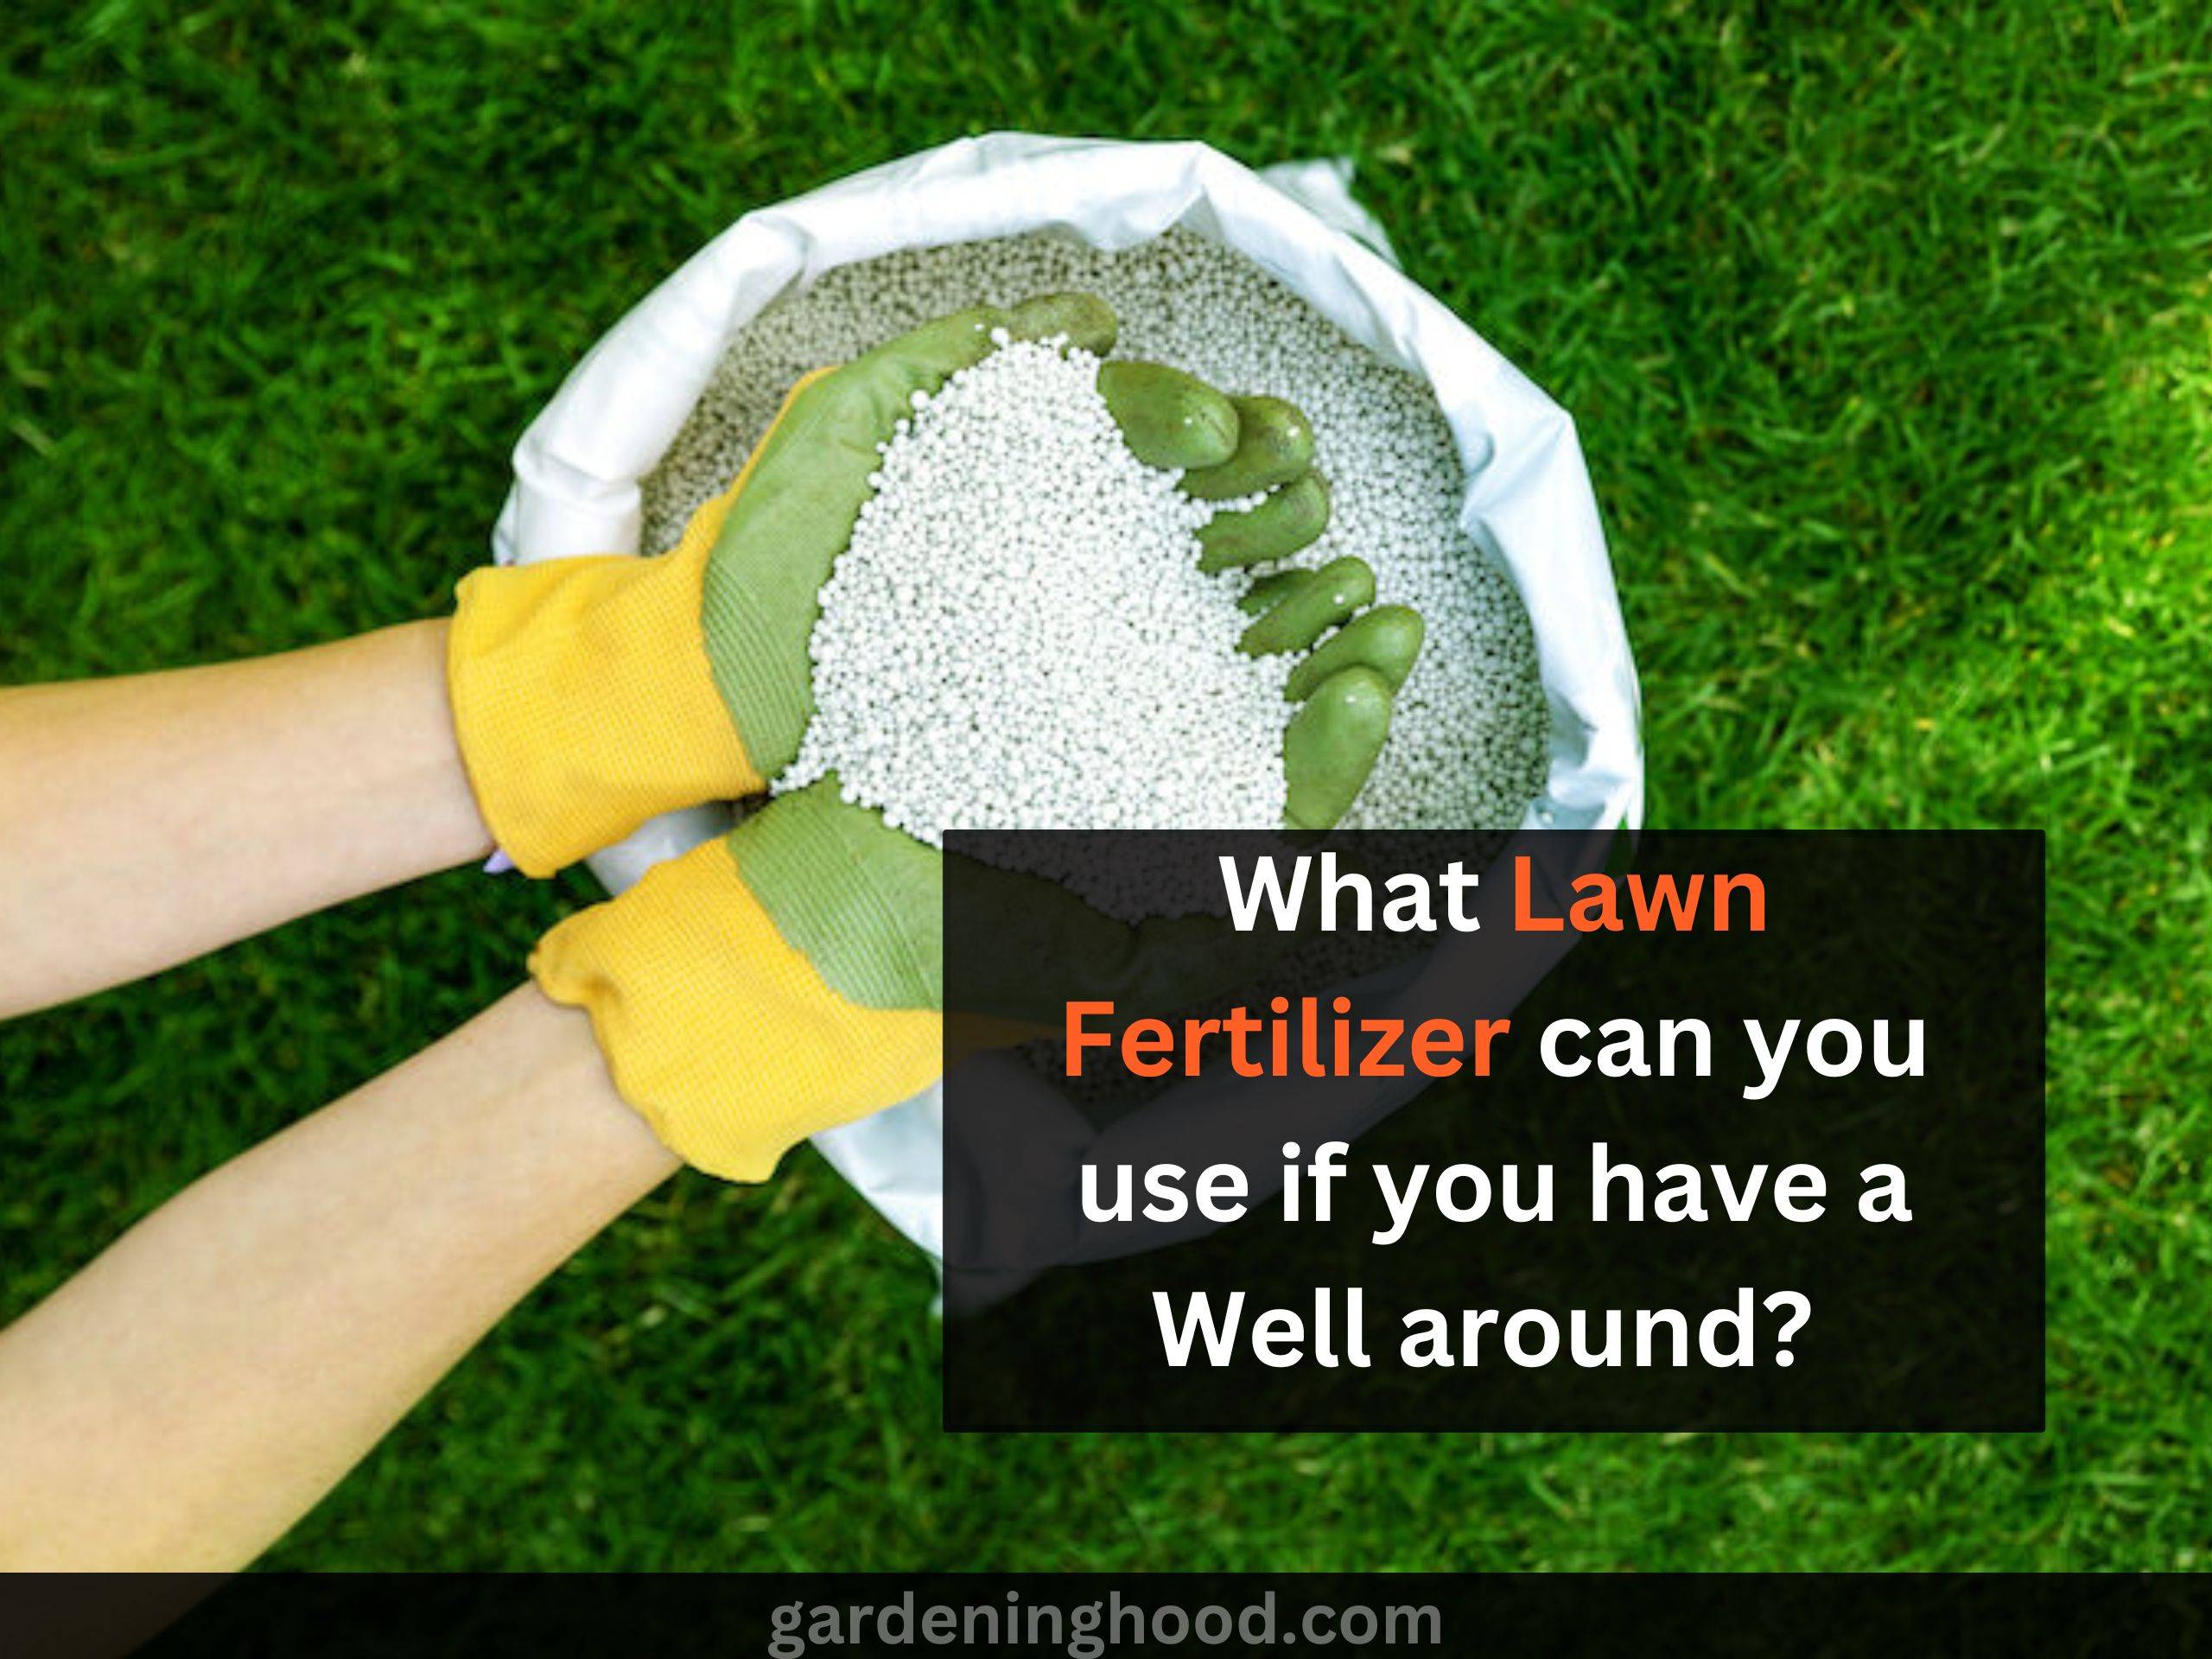 What Lawn Fertilizer can you use if you have a Well around?